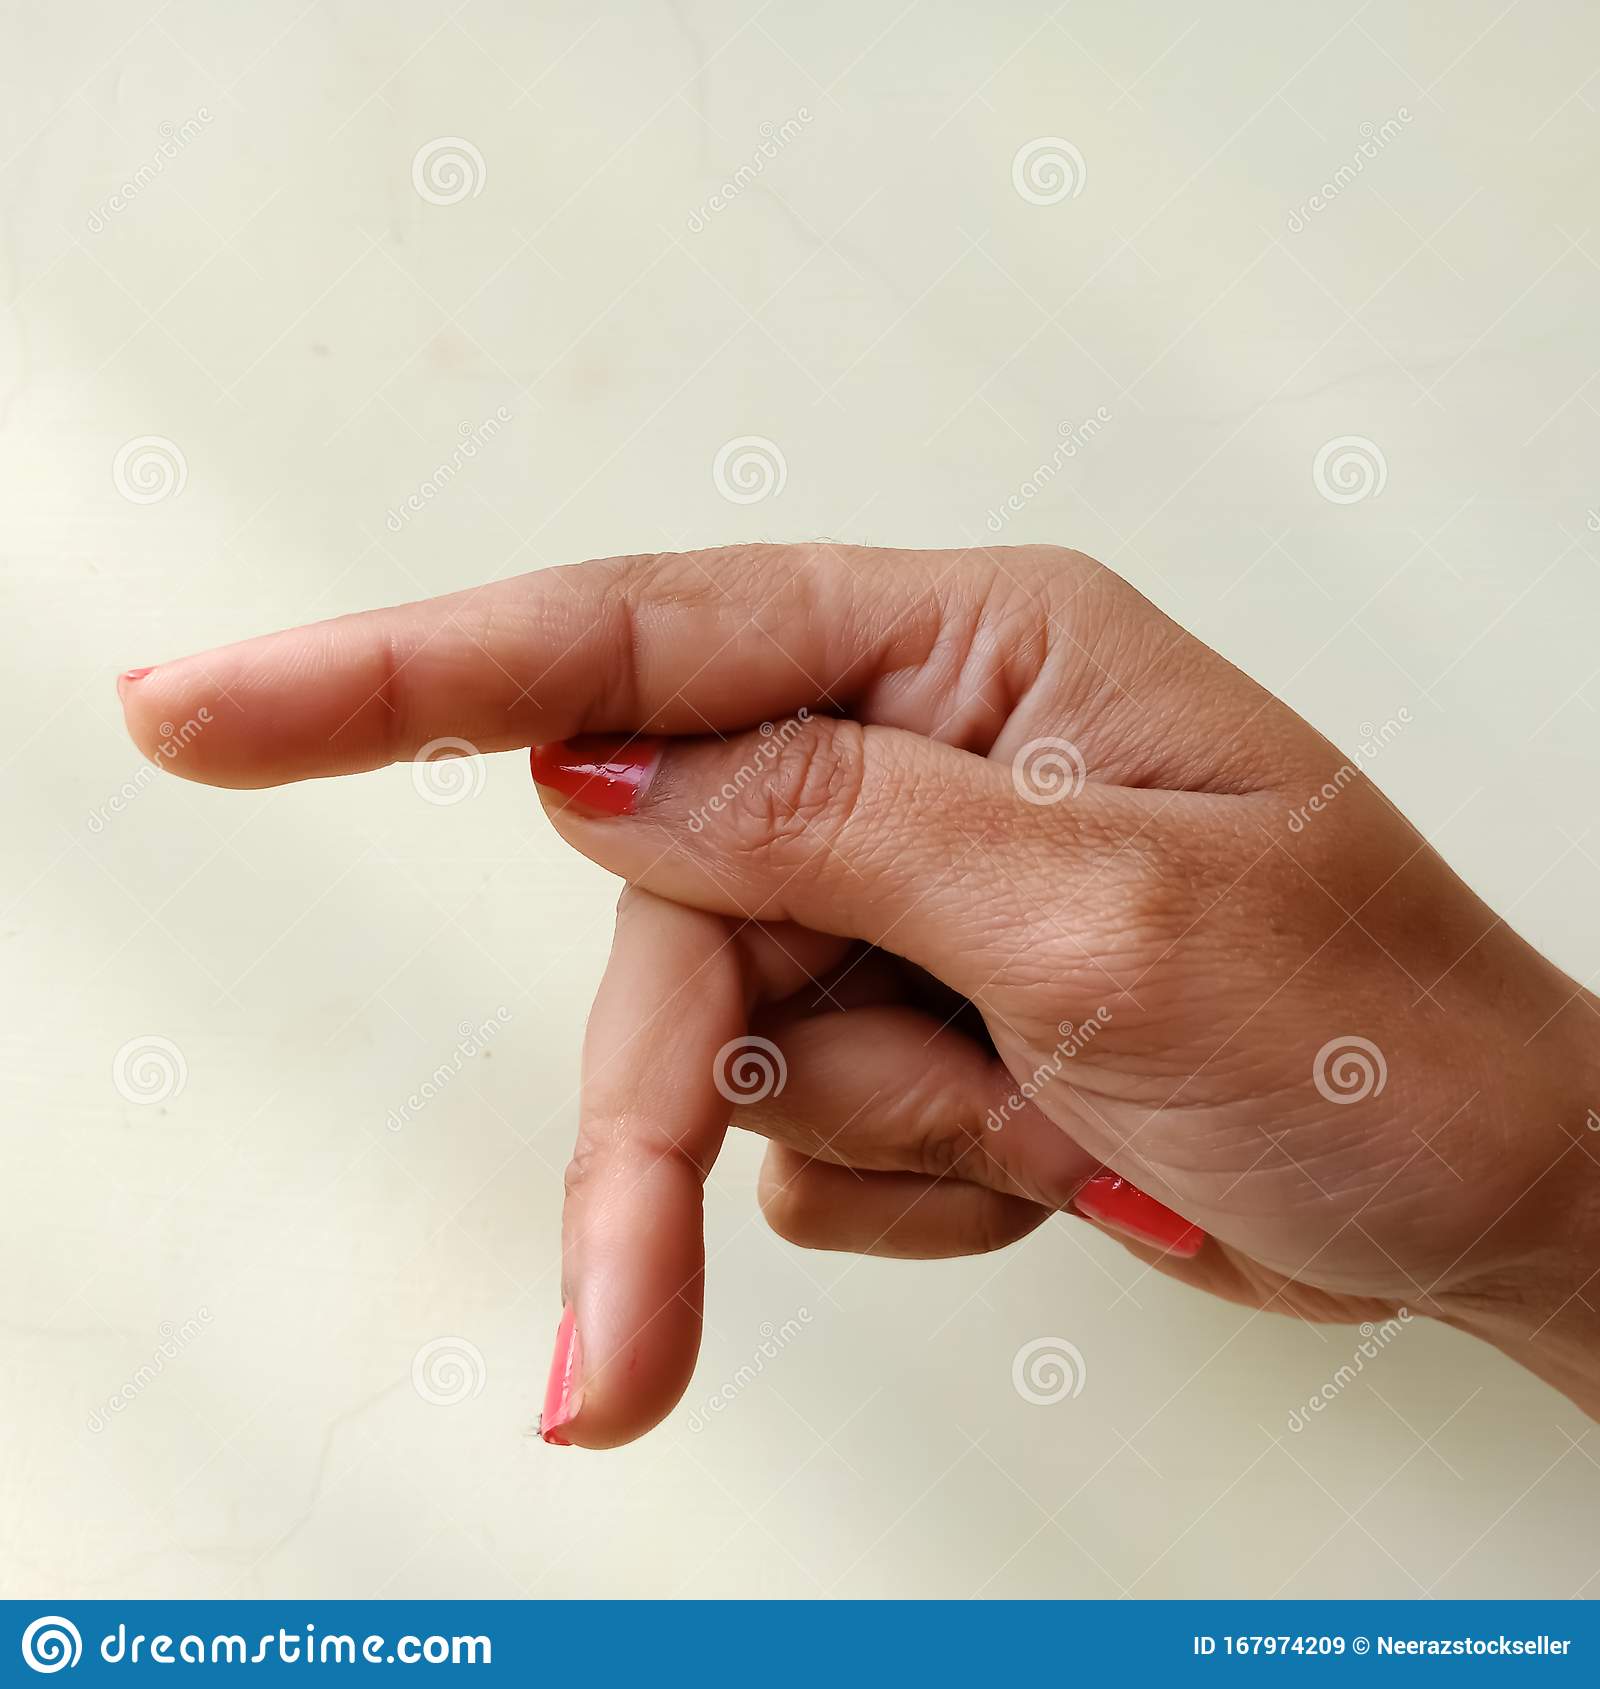 American Sign Language Alphabet Letter P Displayed With ...